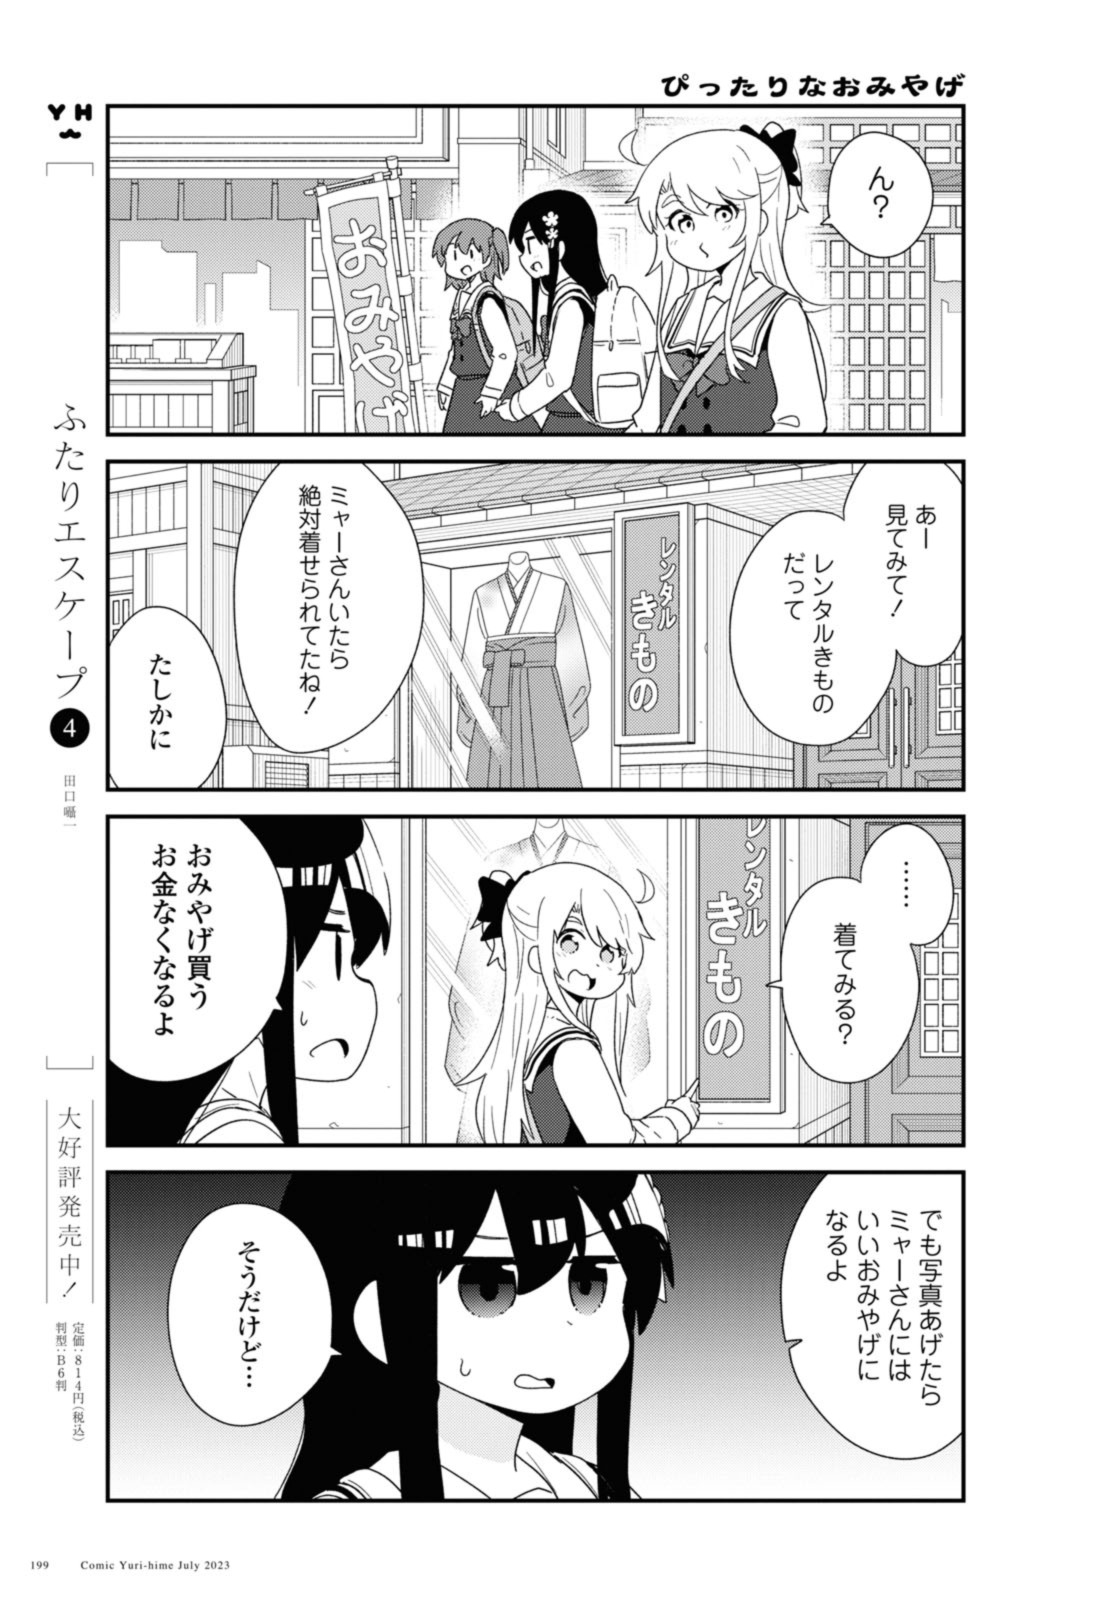 Wataten! An Angel Flew Down to Me 私に天使が舞い降りた！ 第107話 - Page 7